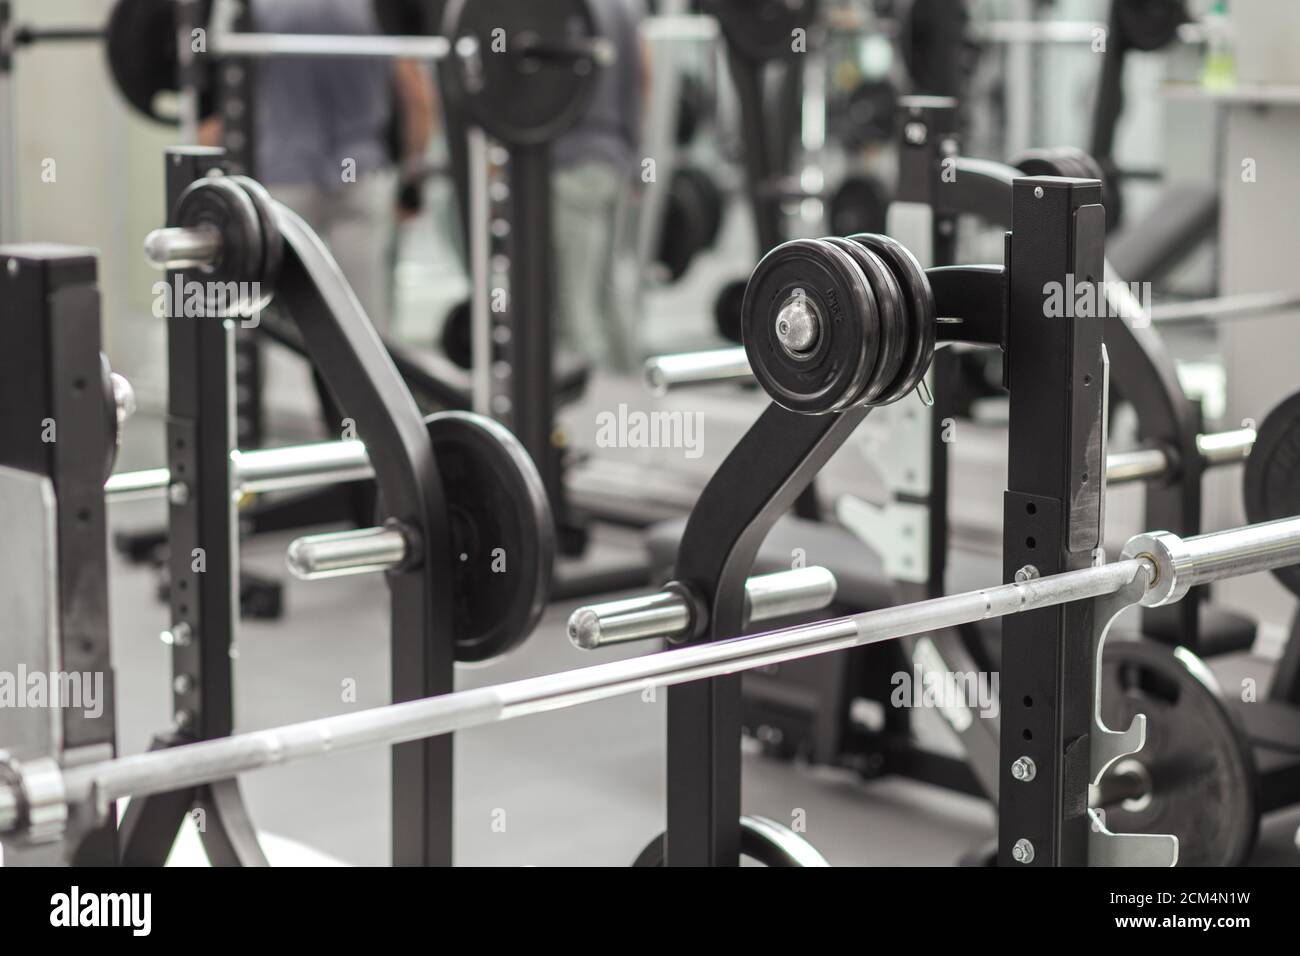 Part or separate detail of sports equipment in gym, close up. Stock Photo